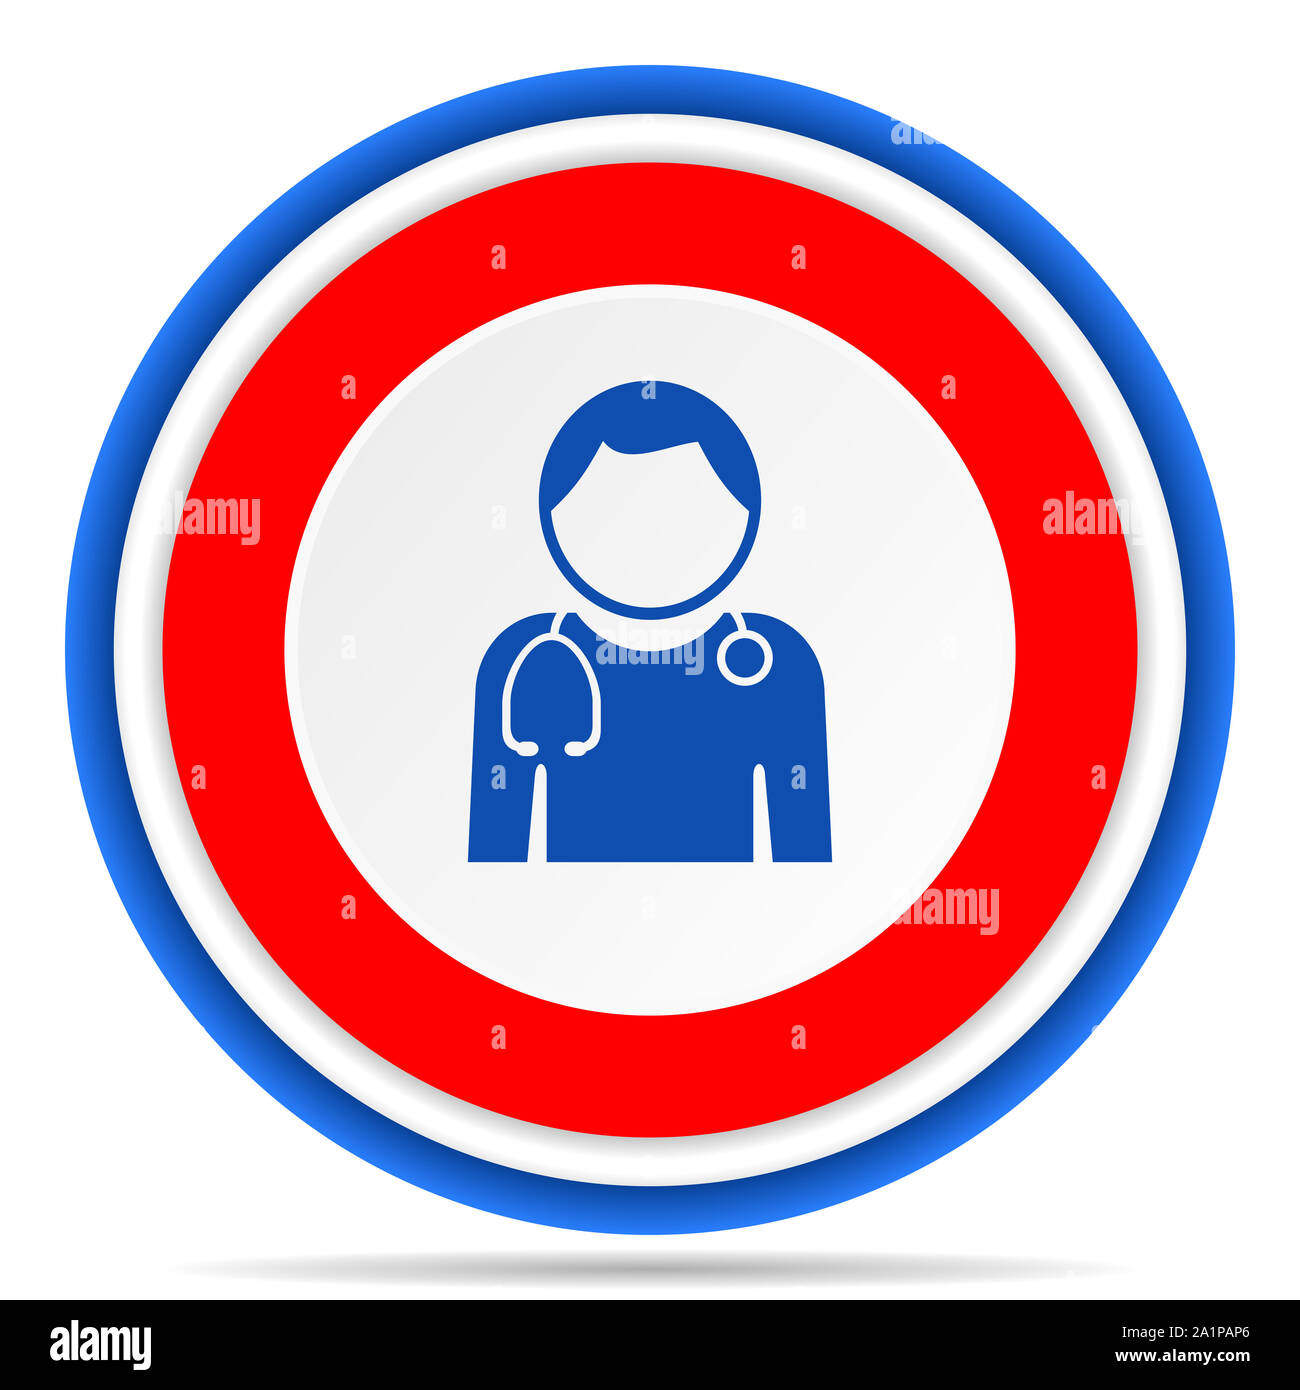 Doctor round icon, red, blue and white french design illustration for web, internet and mobile applications Stock Photo